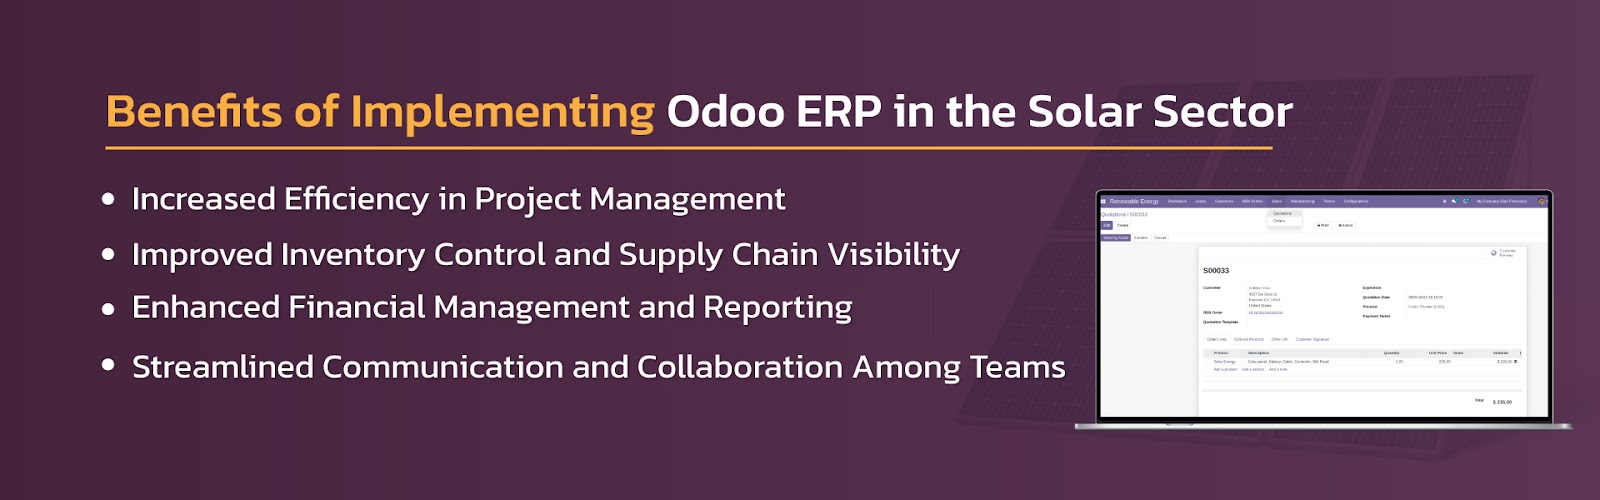 Benefits of Implementing Odoo ERP in the Solar Sector